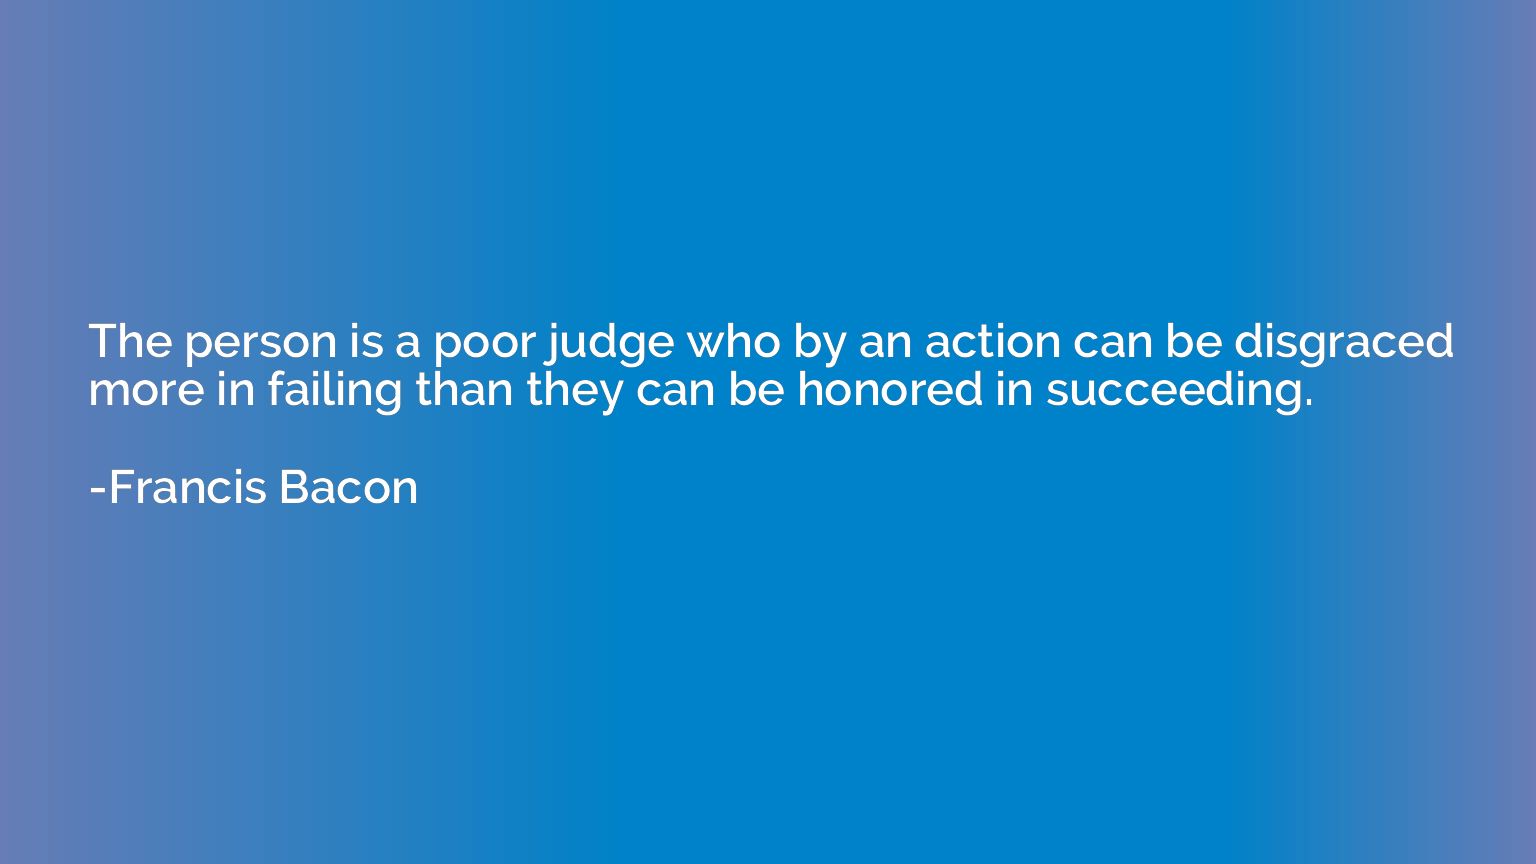 The person is a poor judge who by an action can be disgraced